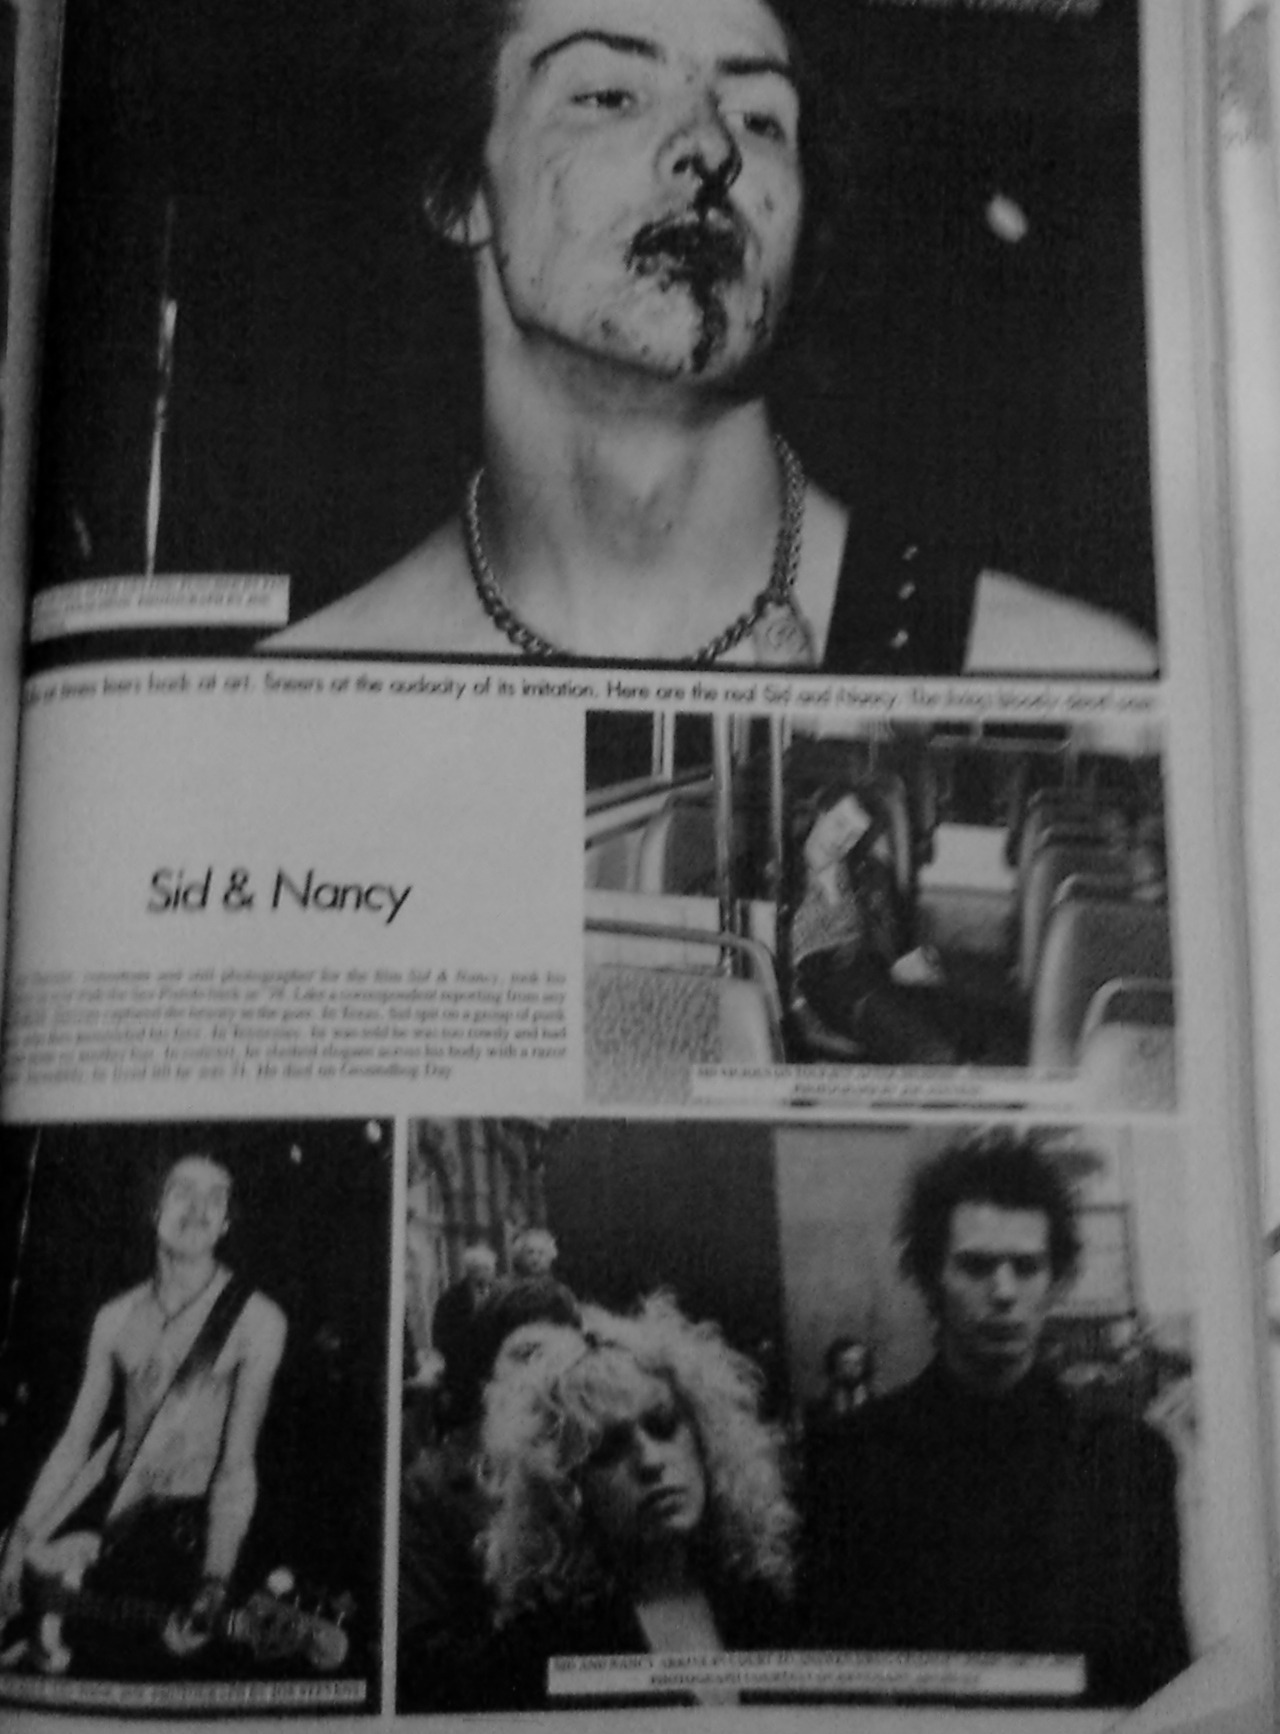 Book with Sid And Nancy